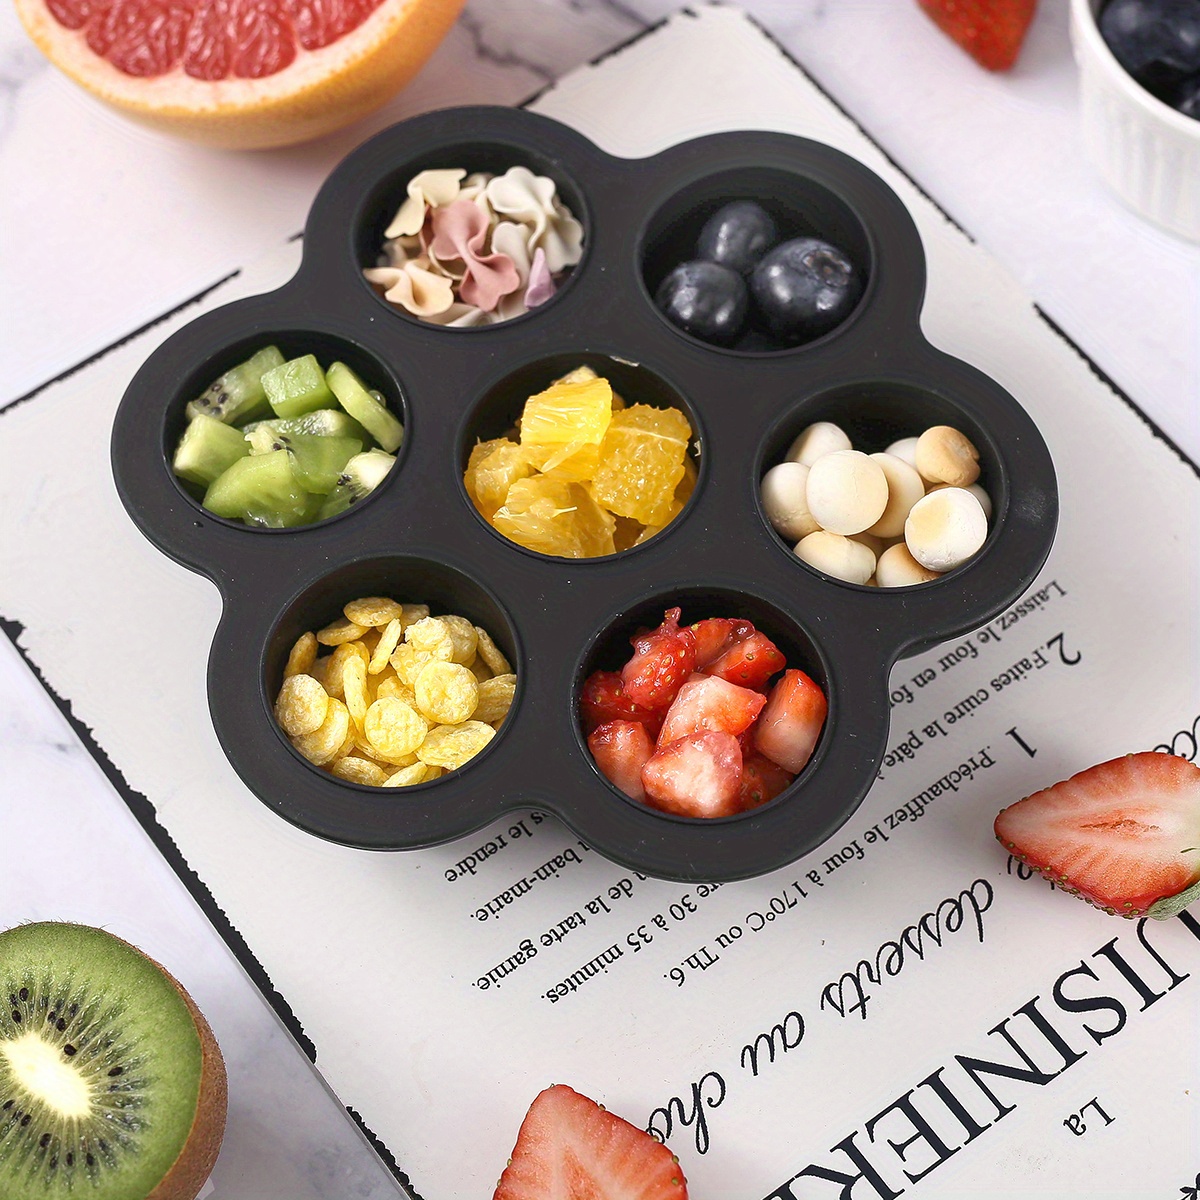 https://img.kwcdn.com/product/round-pudding-cupcake-recipe-tray-bakeware/d69d2f15w98k18-8e29e2cd/1e19d461536/c63f19fb-94ee-4d33-a7e8-a53b4b8e1e25_1200x1200.jpeg?imageMogr2/auto-orient%7CimageView2/2/w/800/q/70/format/webp